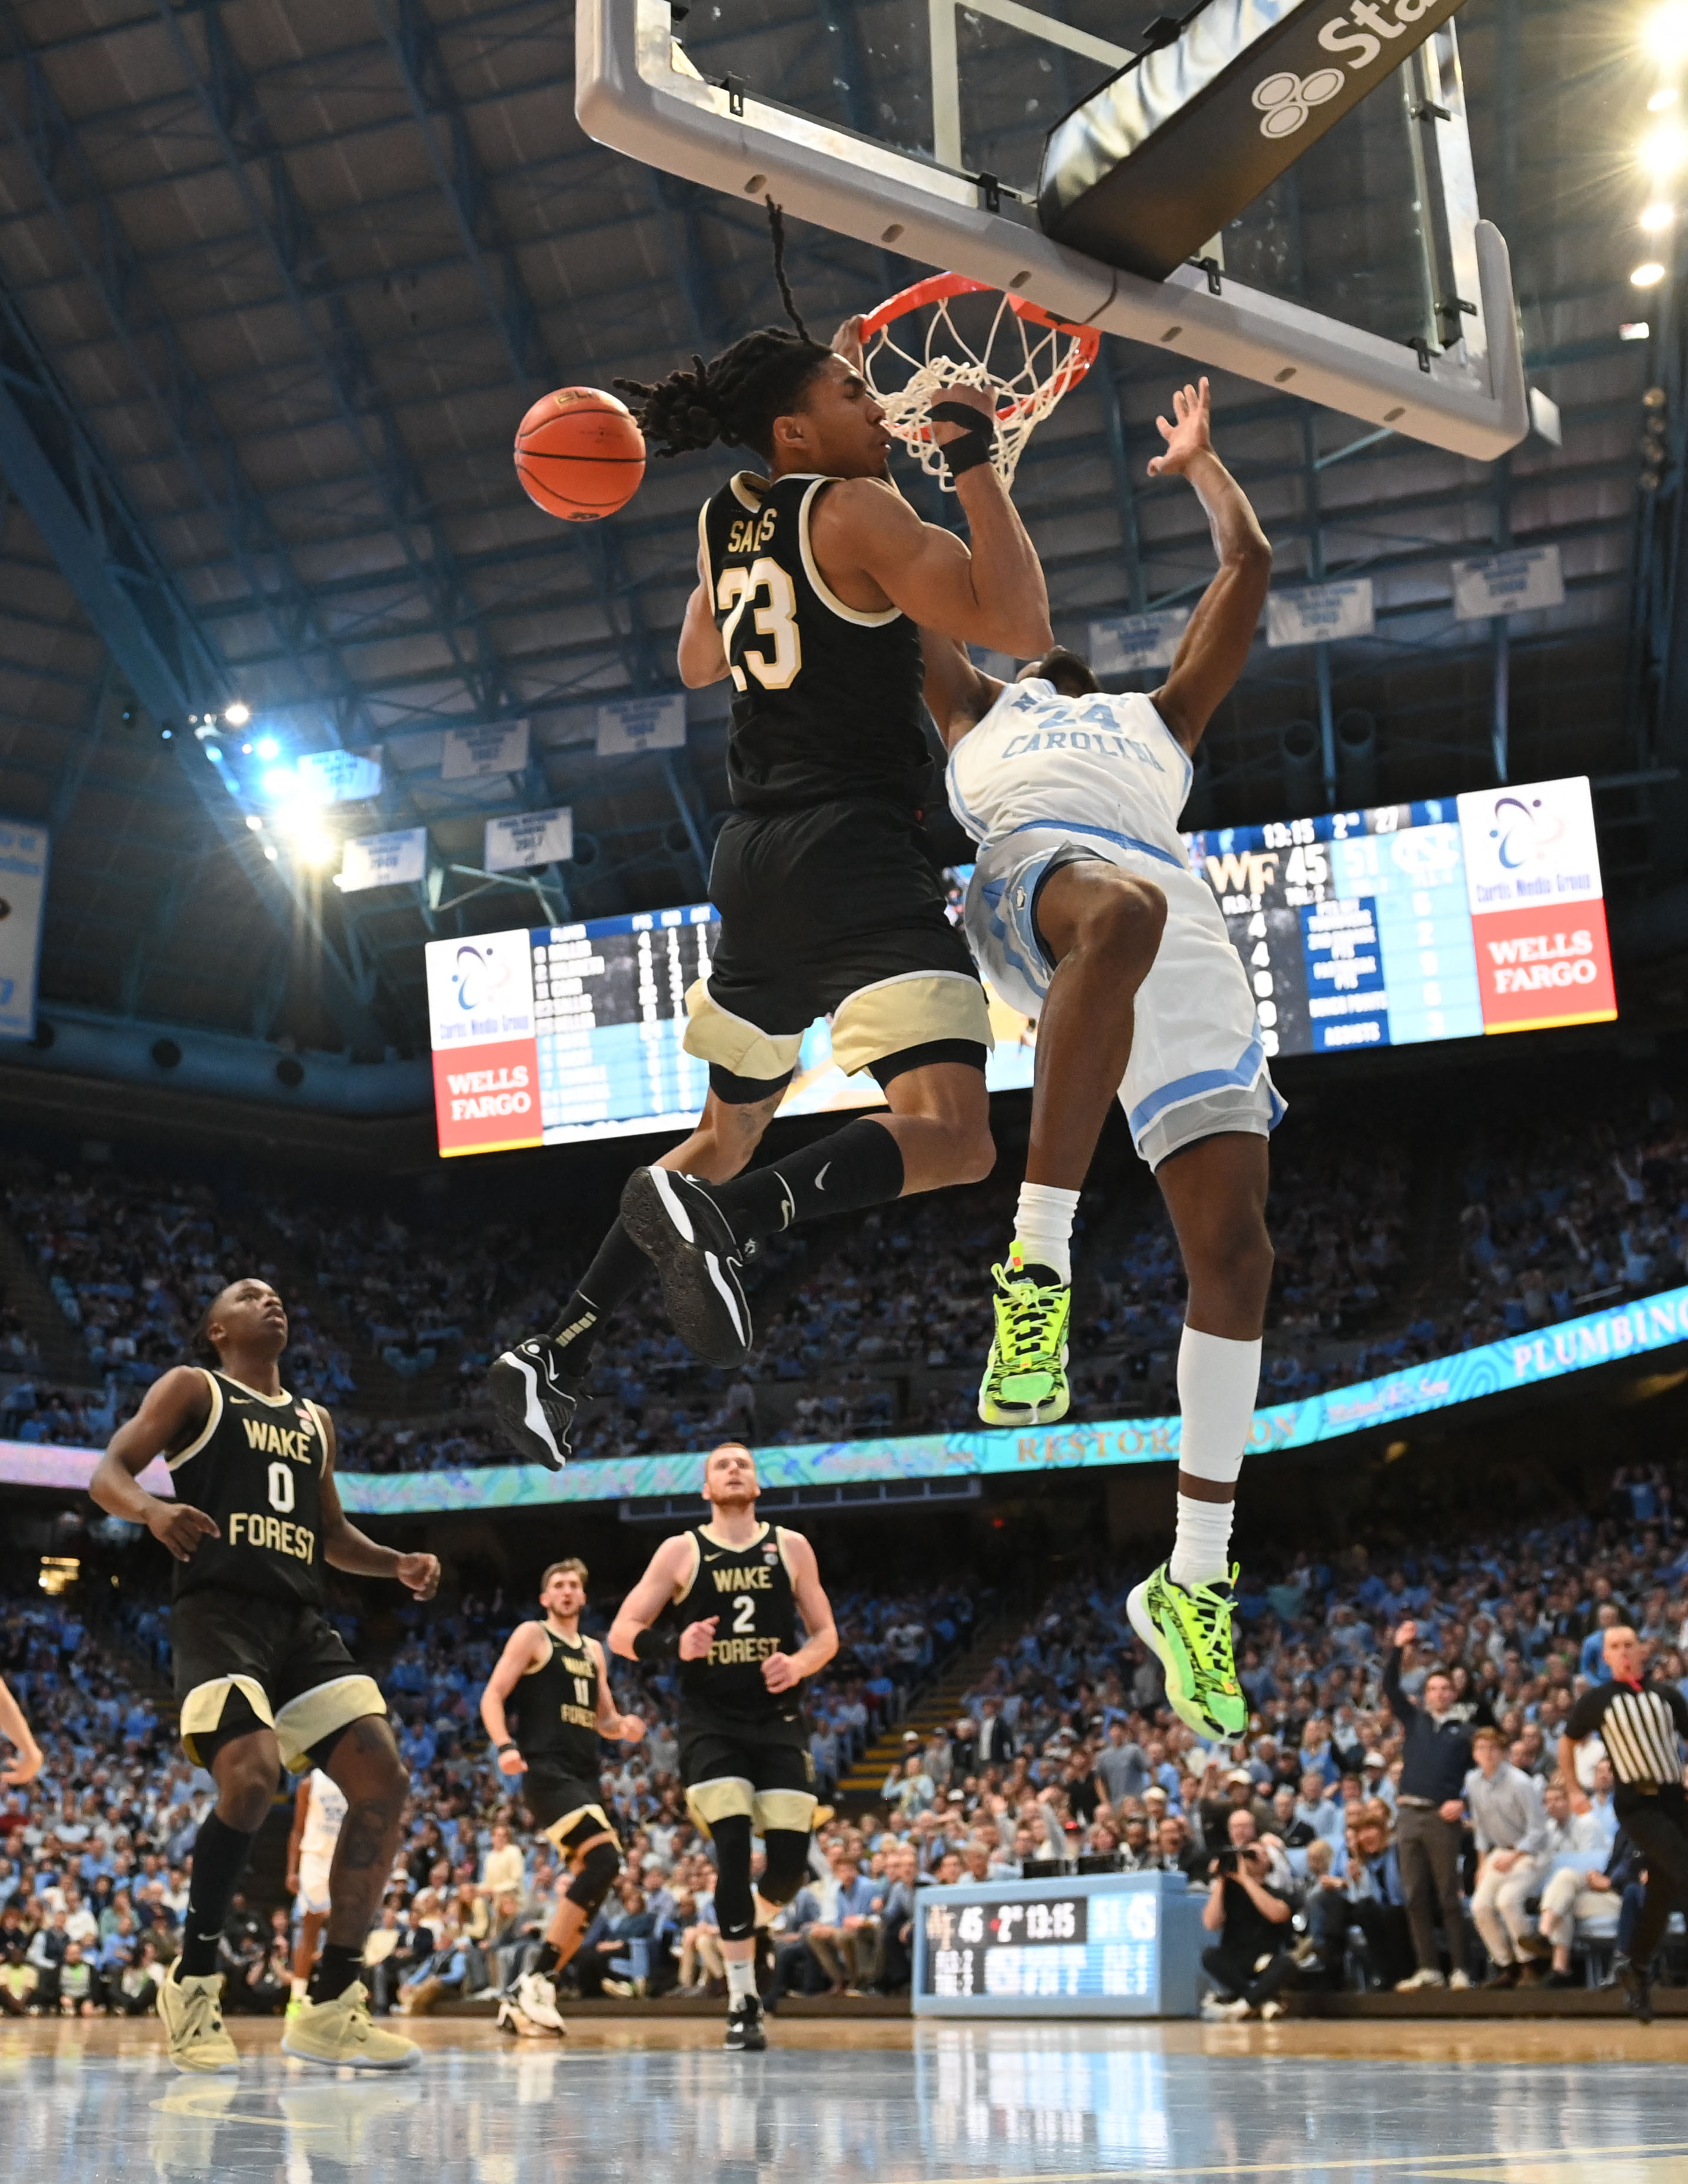 RJ Davis drops career-high 36, lifts No. 3 UNC over Wake Forest | Reuters